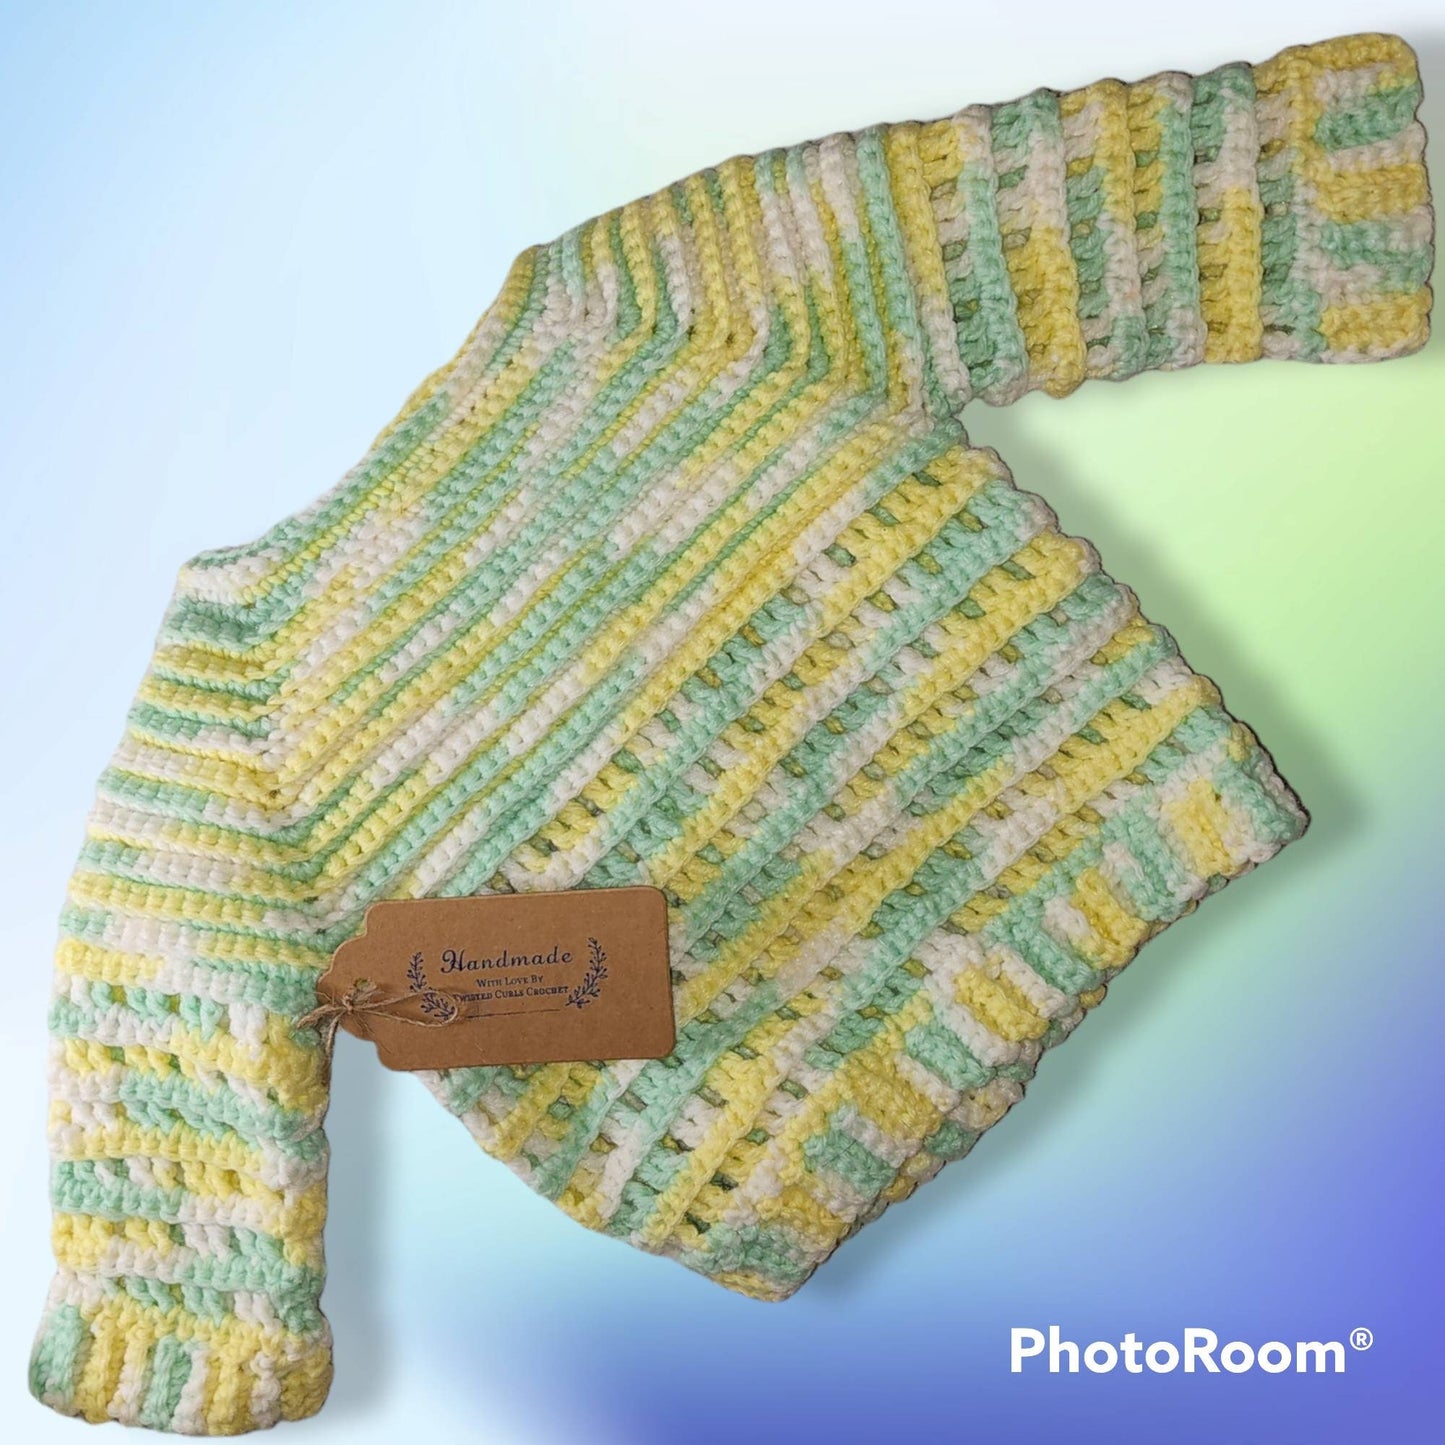 Handmade 6 to 9 month-old baby boy sweater